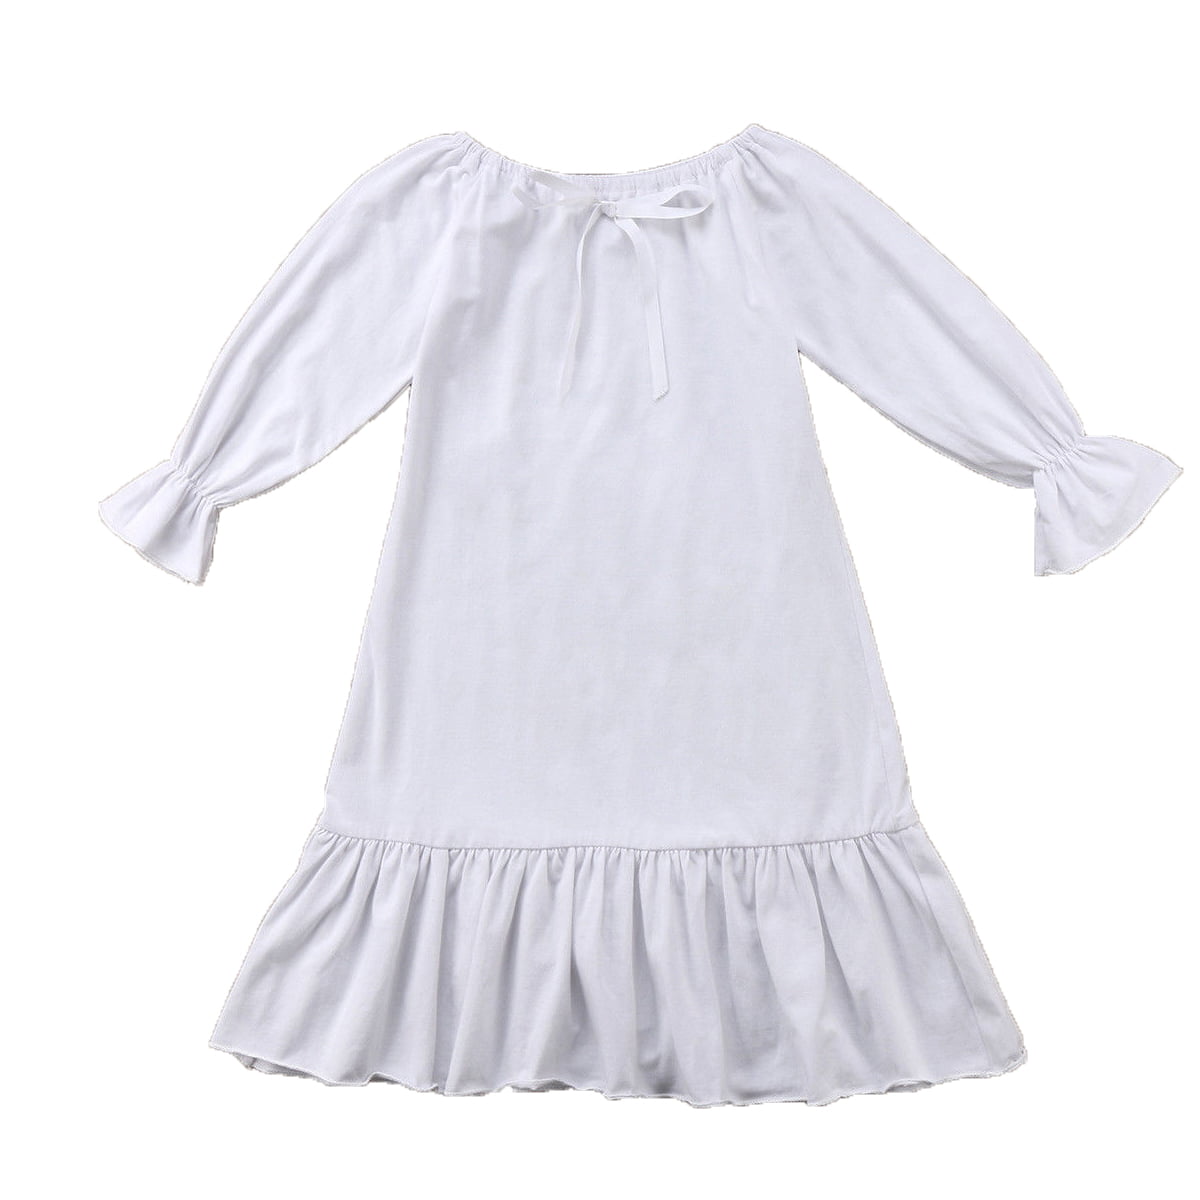 Calsunbaby - Kids Princess Party Cotton Dress Longuette Nightgown Girl ...